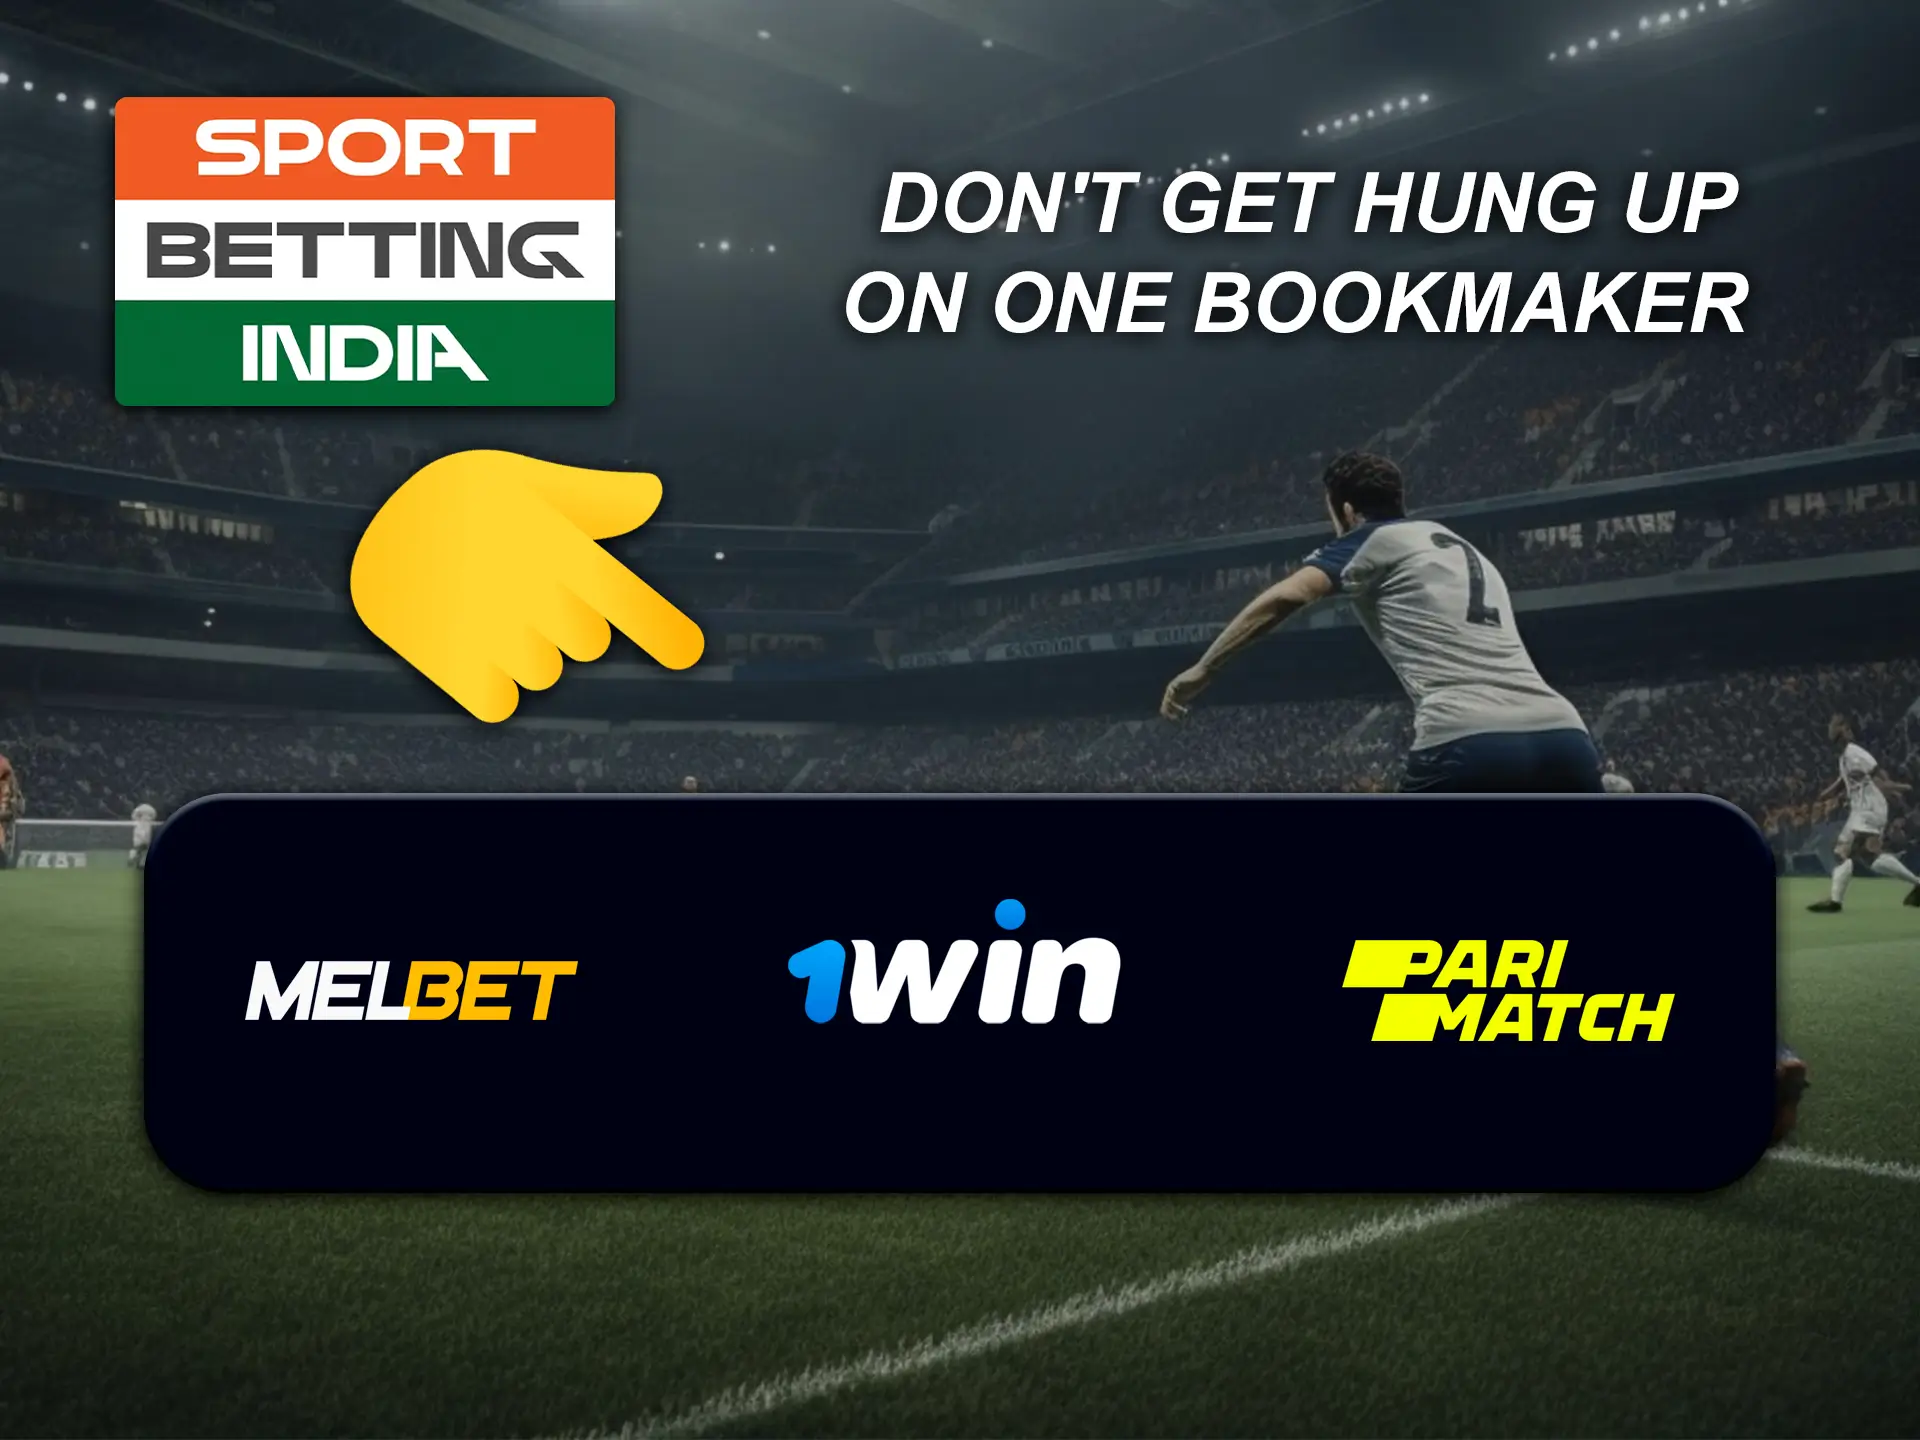 Take advantage of bonuses from different companies to maximise your betting income.